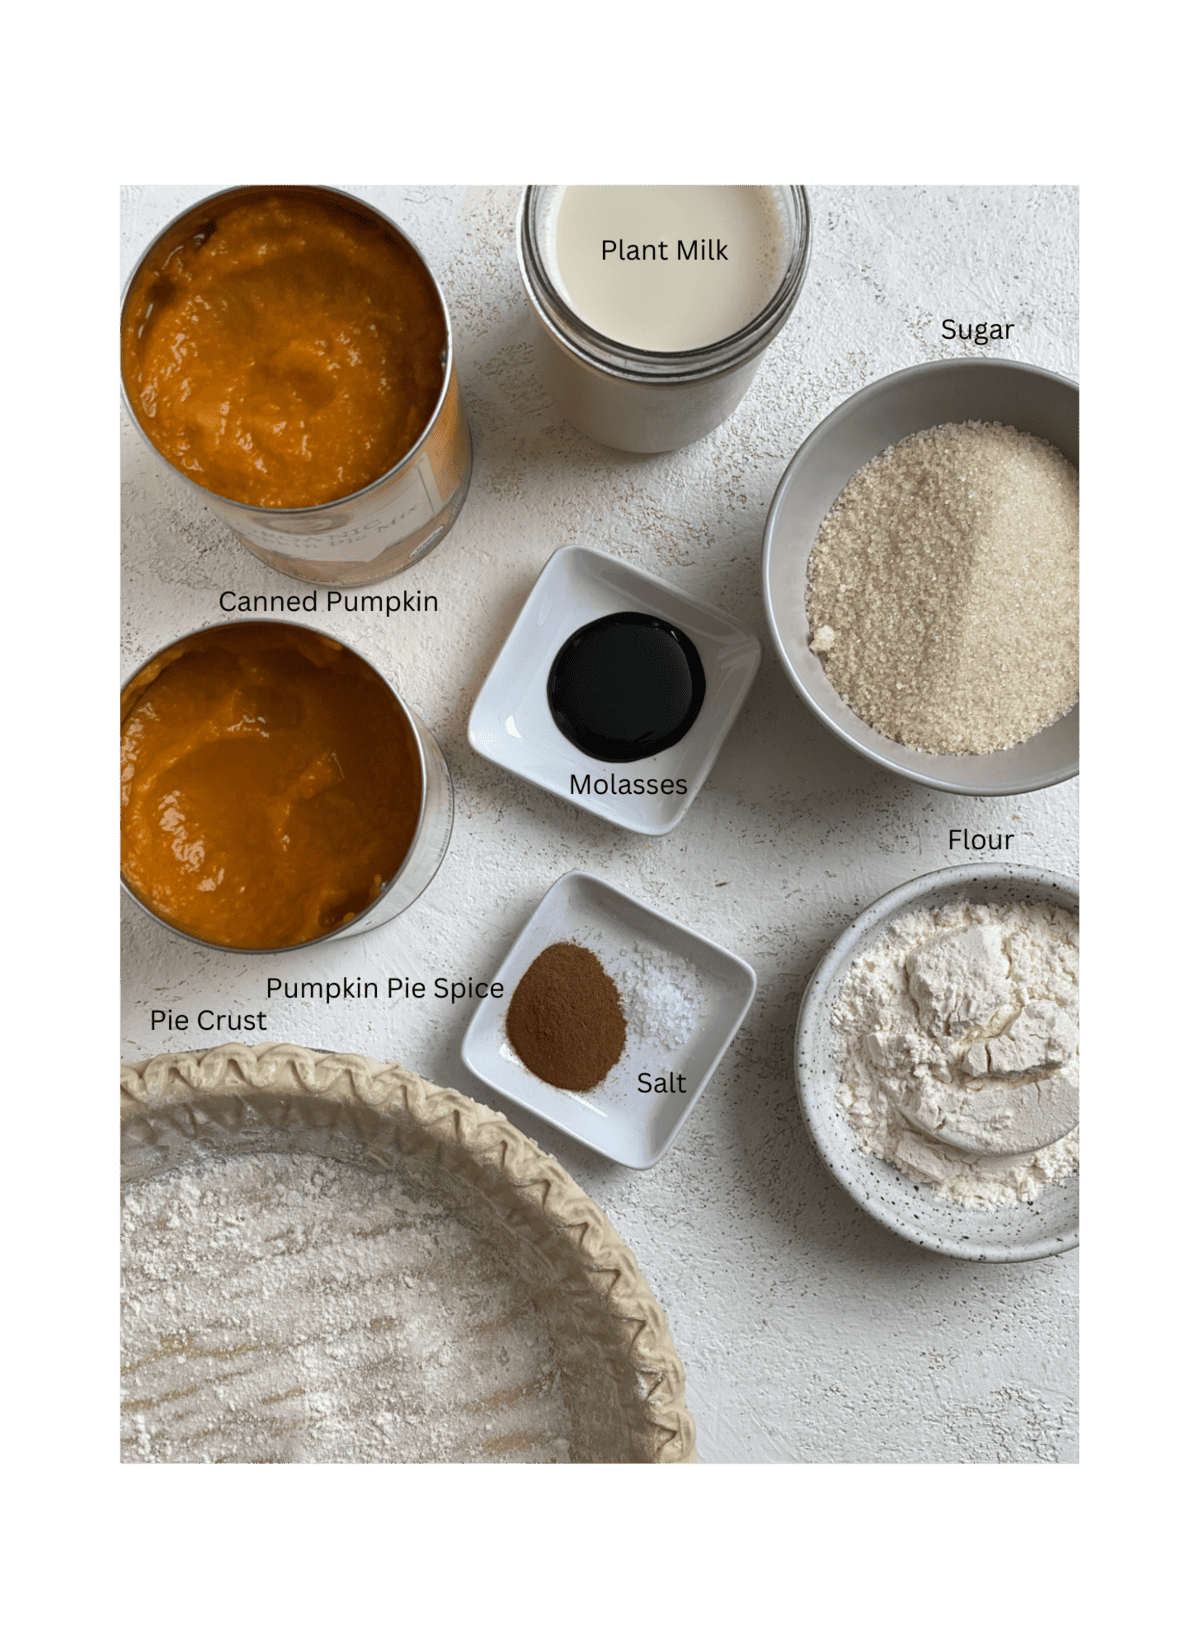 ingredients for Easy Vegan Pumpkin Pie measured out against a white surface